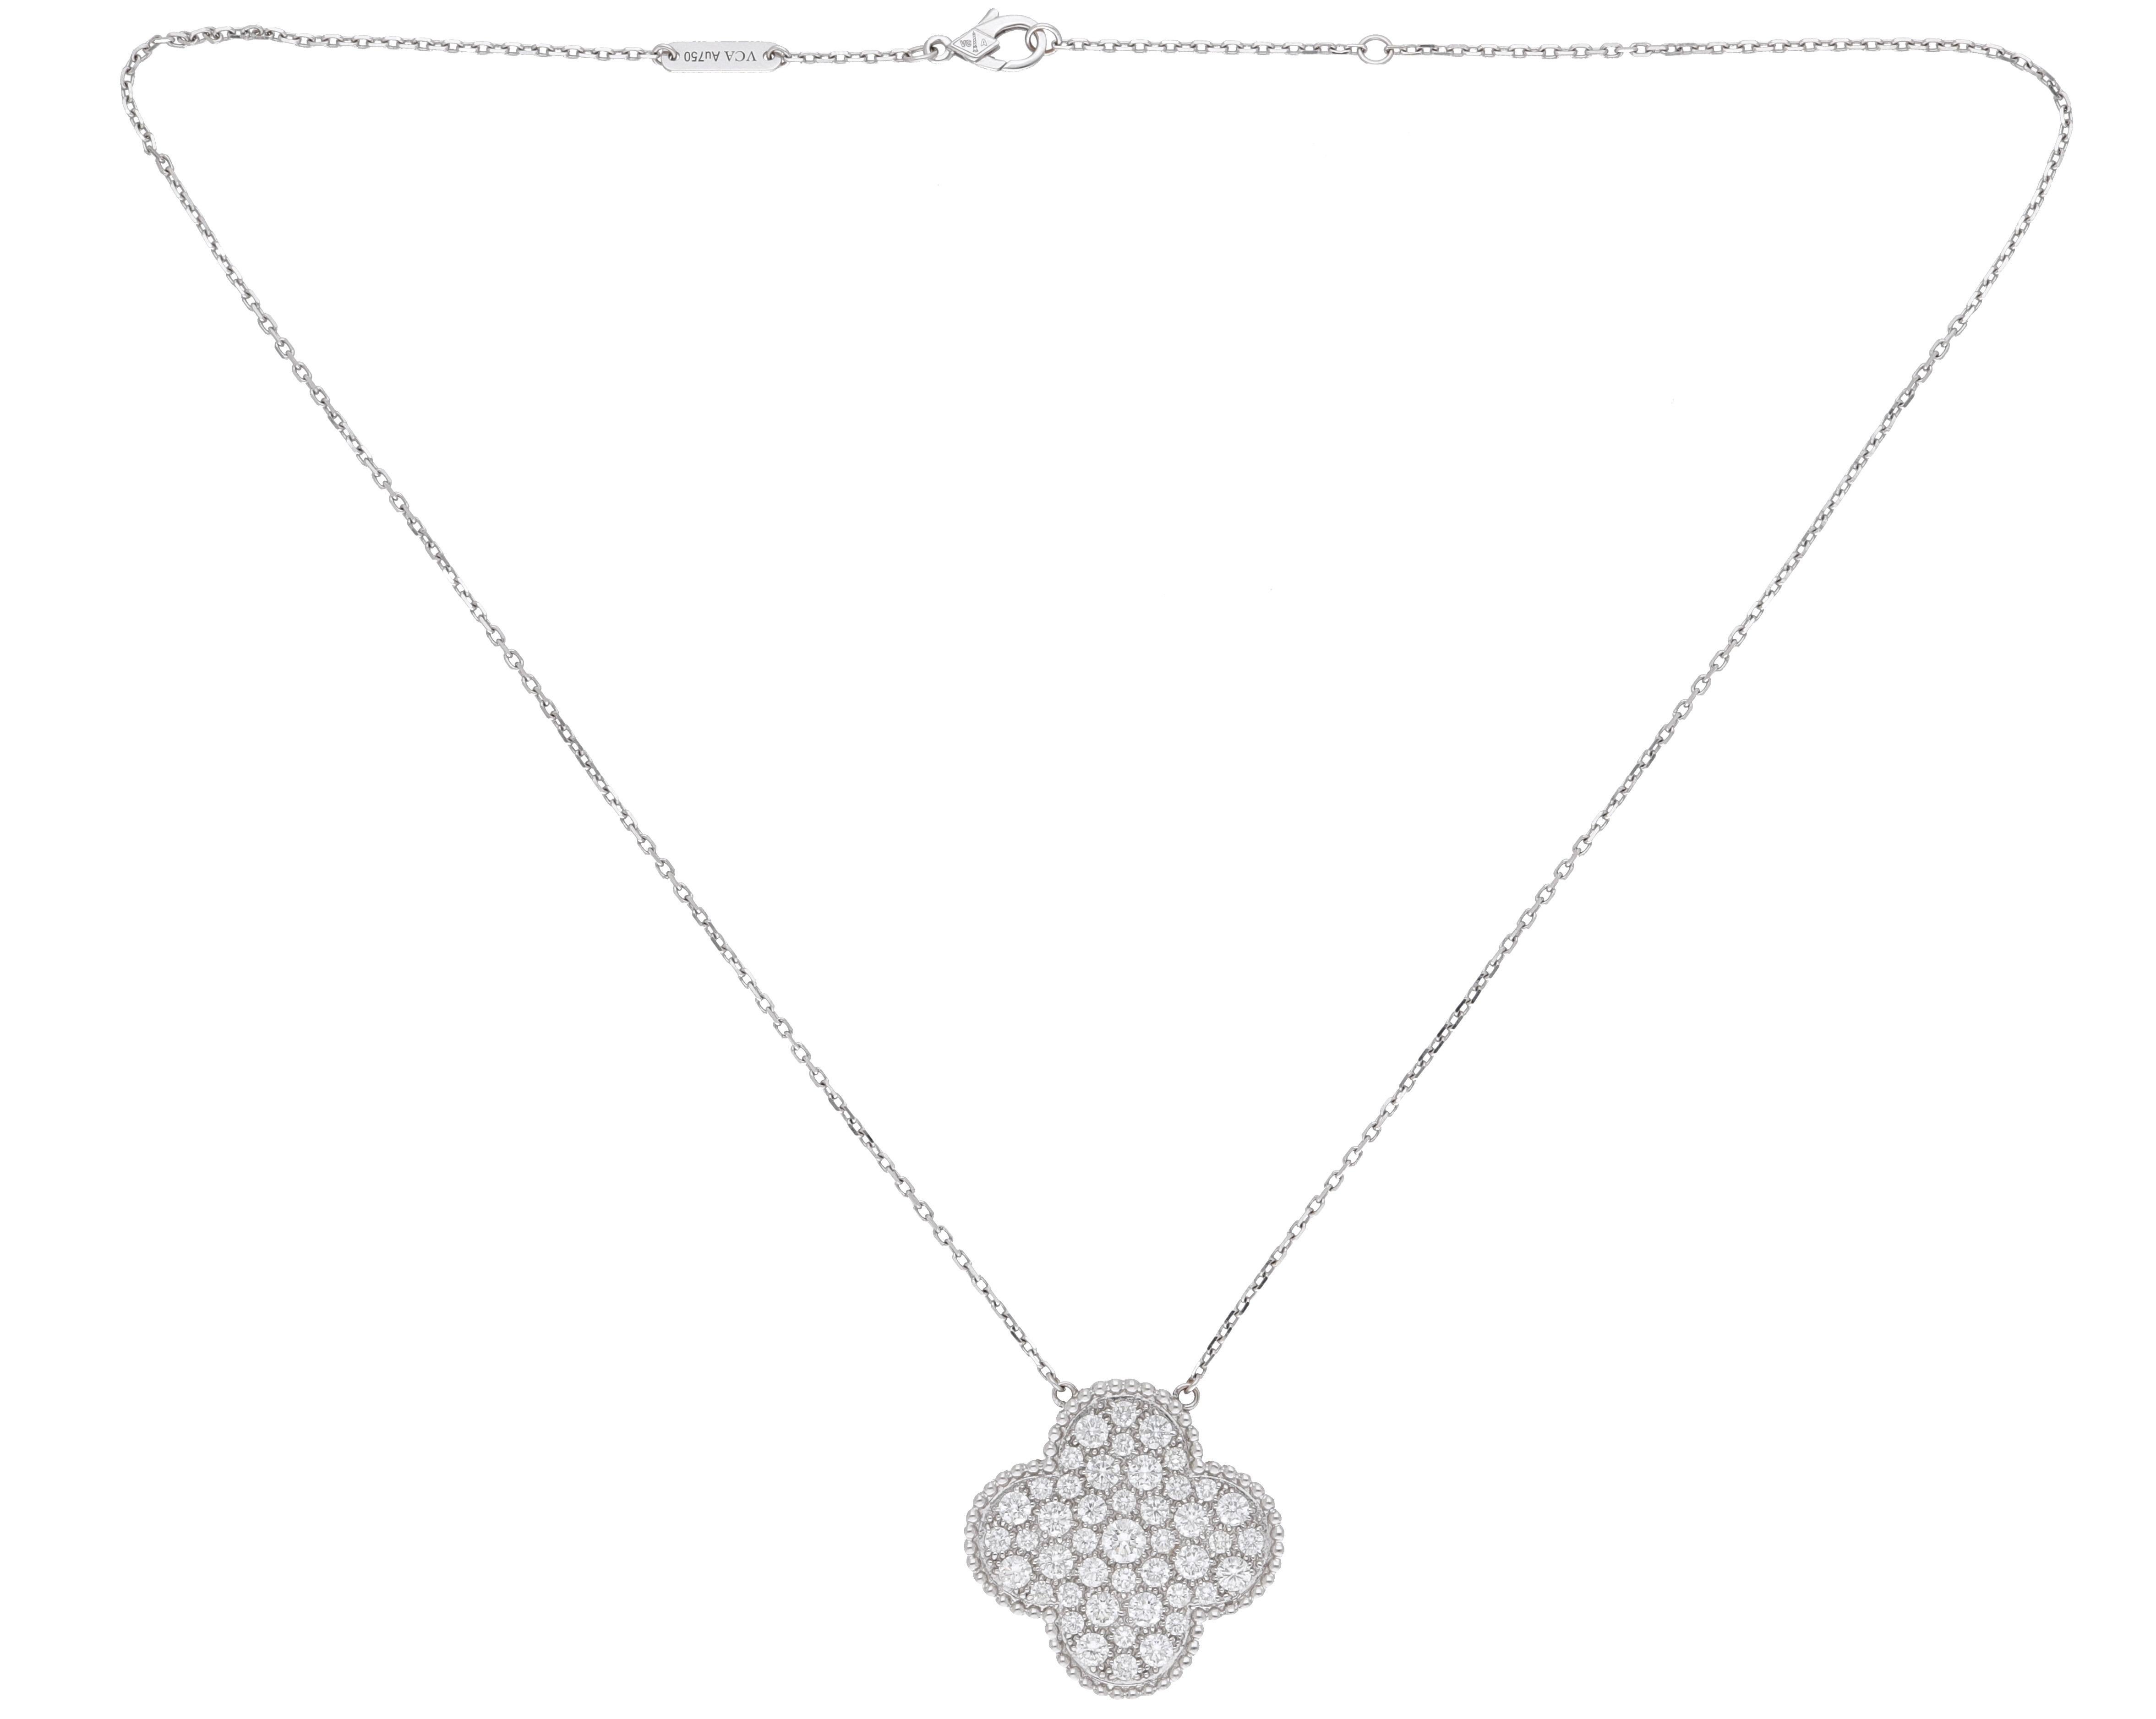 Van Cleef & Arpels Magic Alhambra pendant necklace , rhodium plated 18K white gold, 2.45 carats of round-cut diamonds; ( diamond quality DEF, IF to VVS. )
This iconic design is perfect for every occasion.
Created in 2006 by Van Cleef & Arpels, the